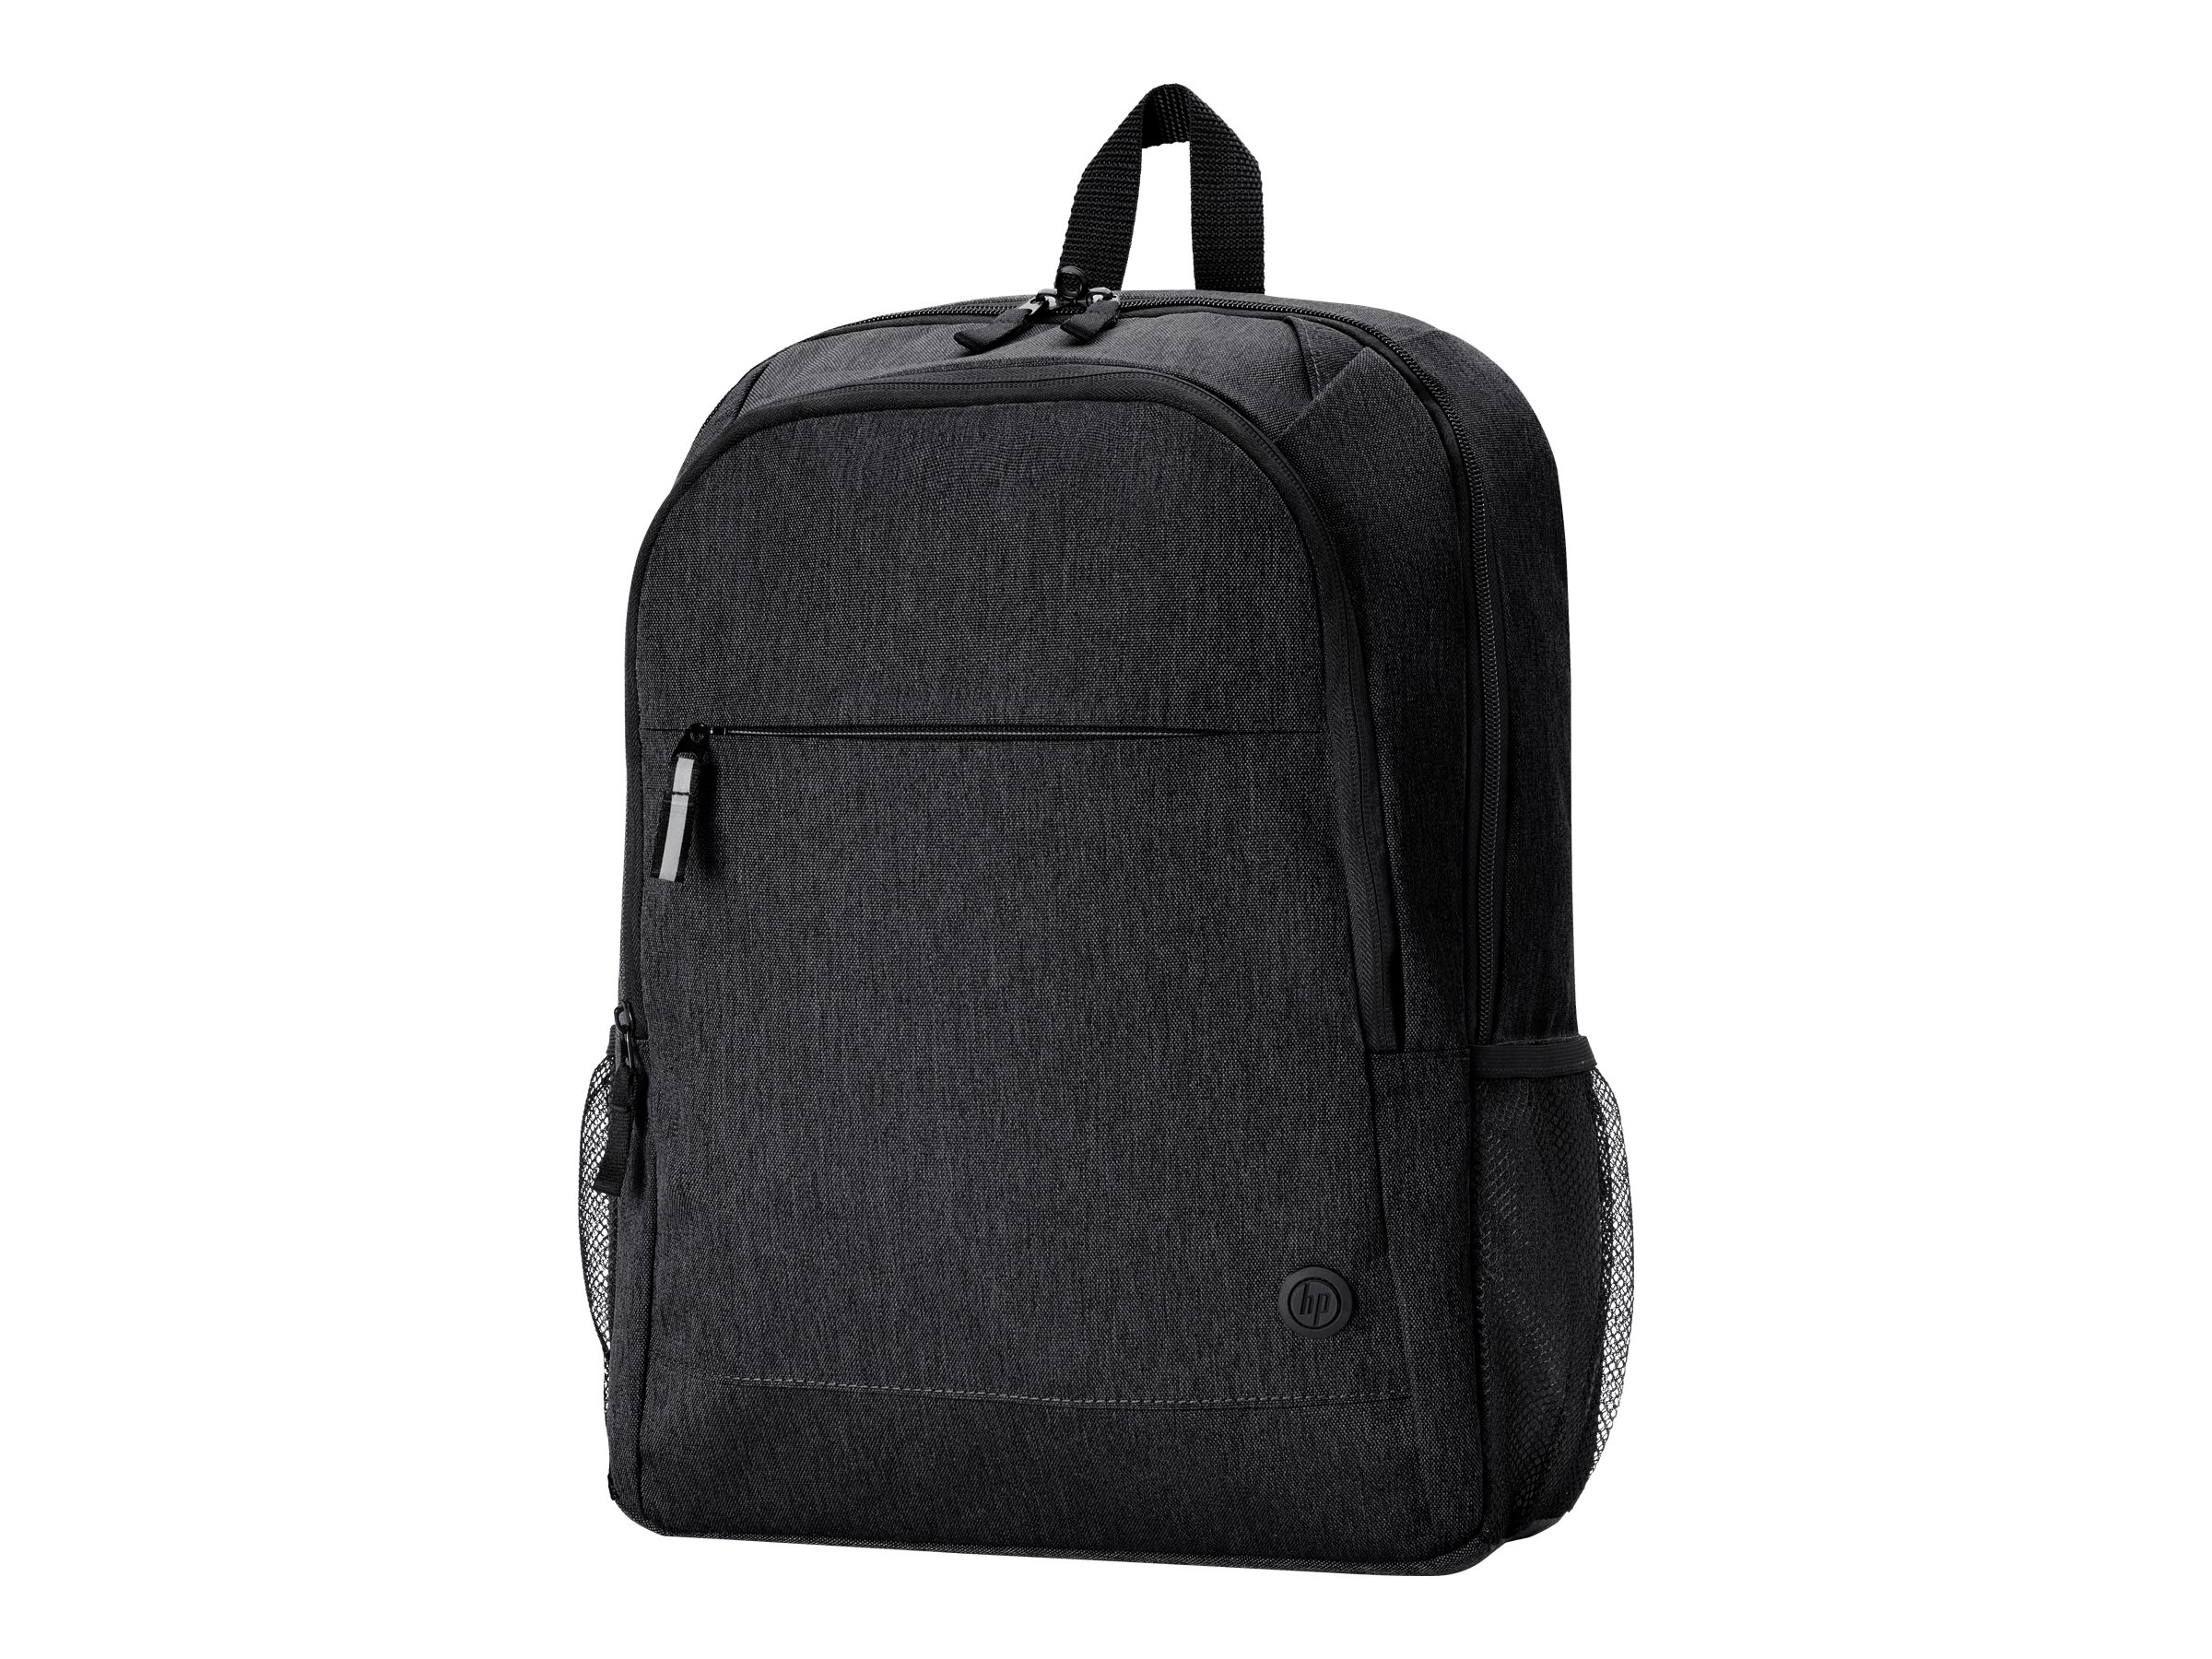 Hewlett Packard (HP) HP Prelude Pro Recycled Backpack - Noteb